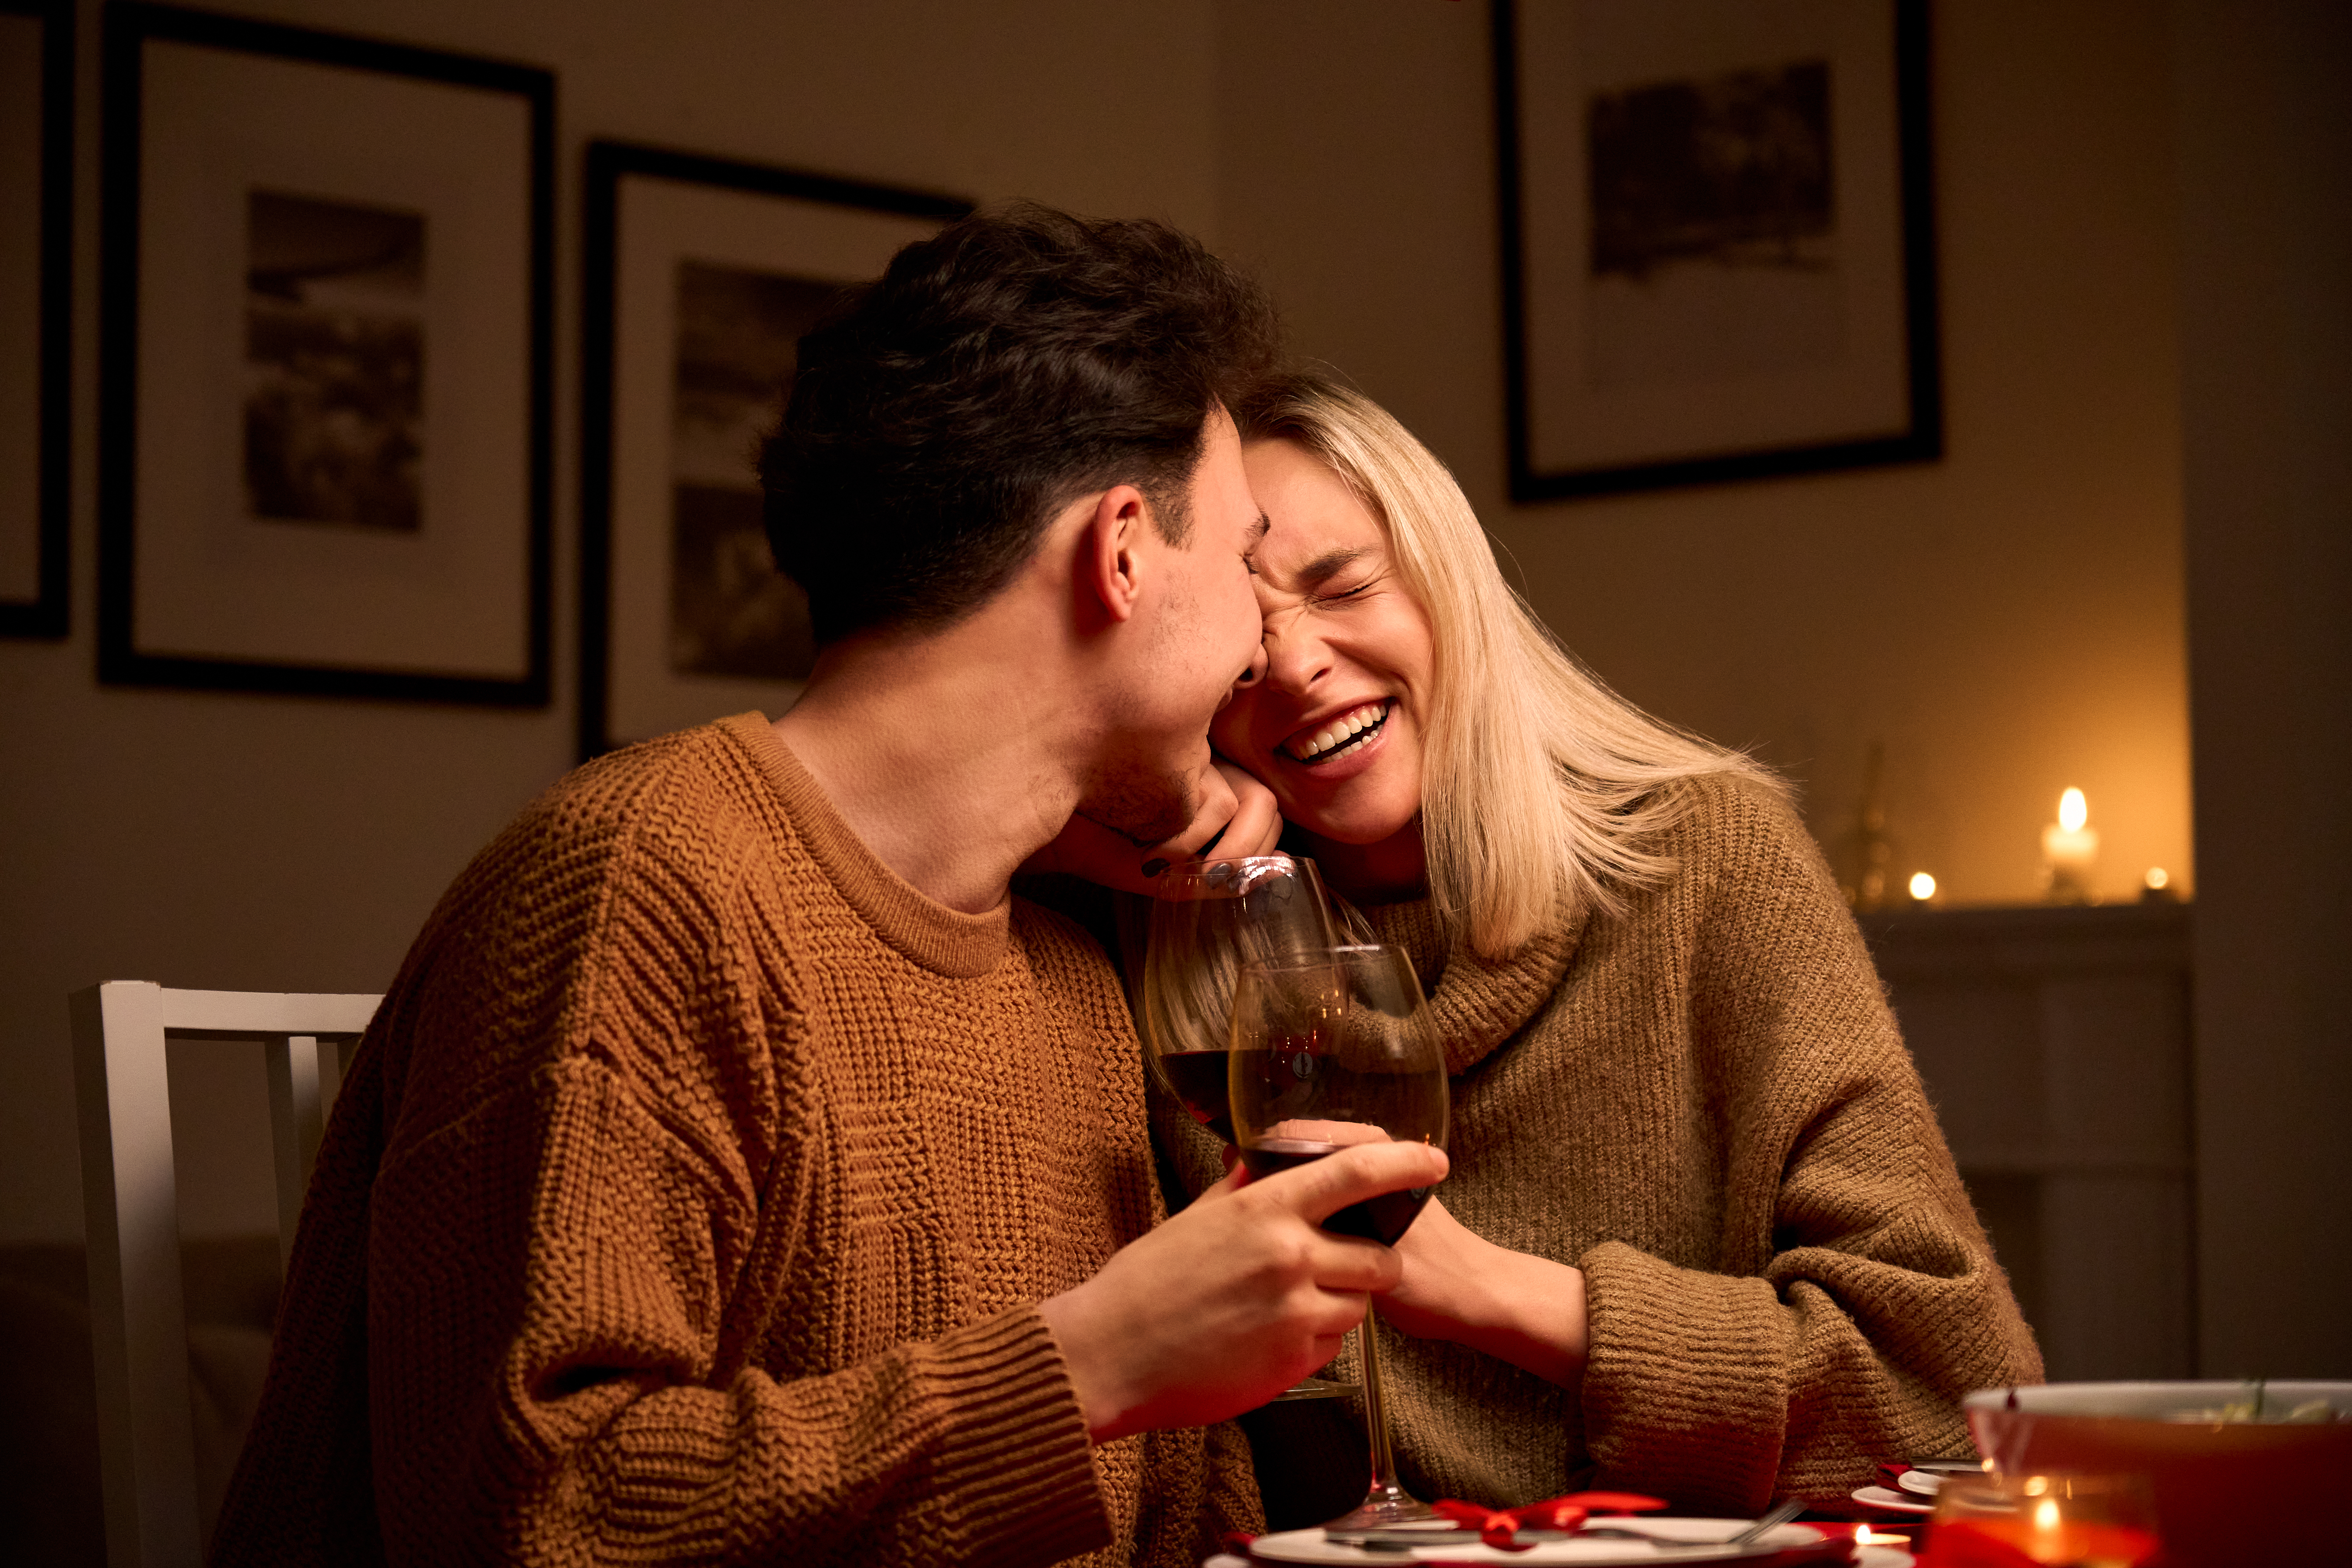 A woman and a man laughing at dinner | Source: Getty Images